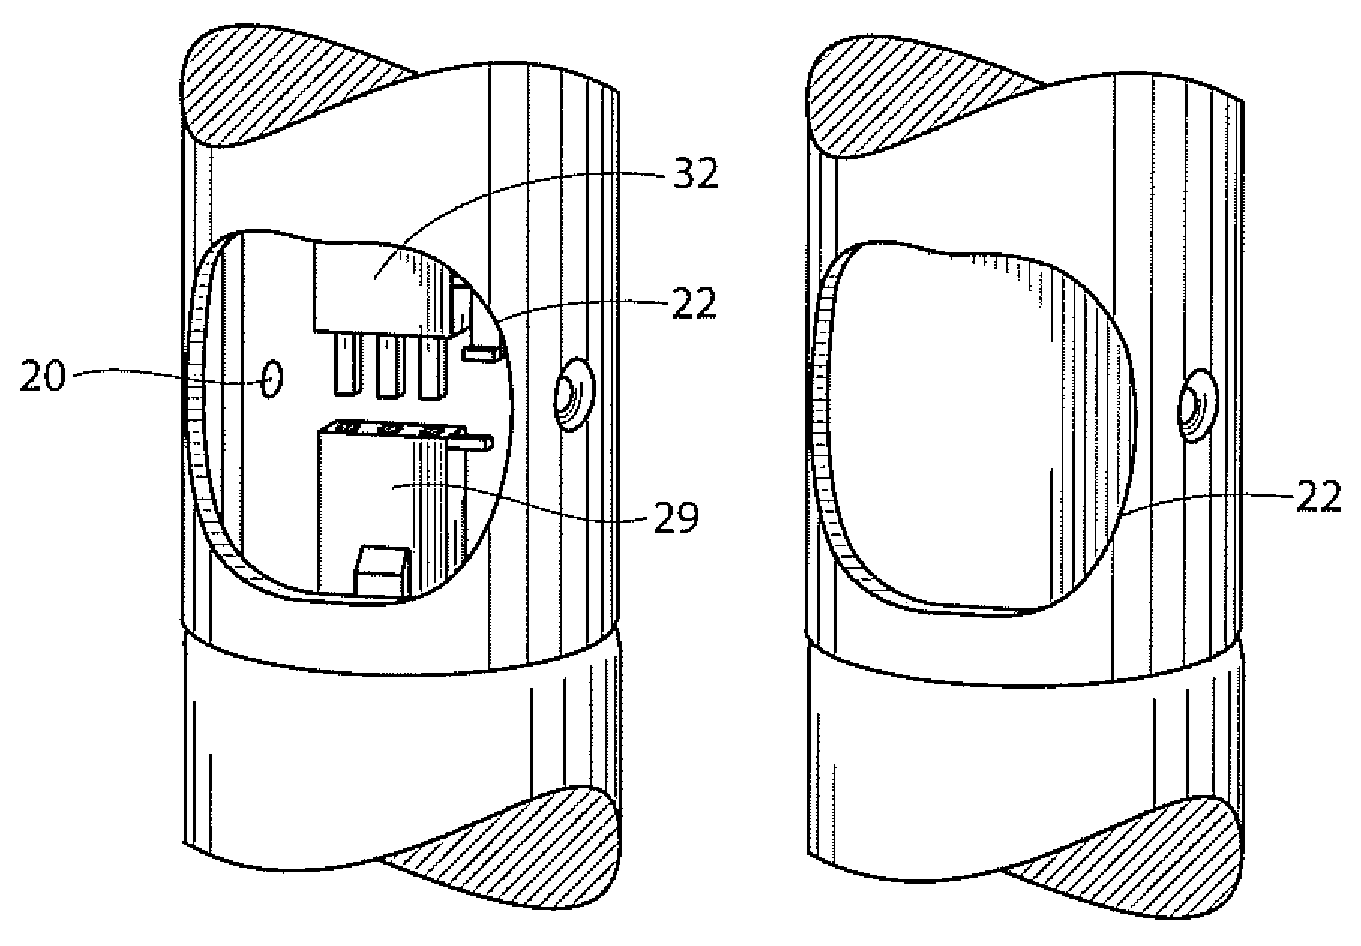 Electrical connector within tubular structure